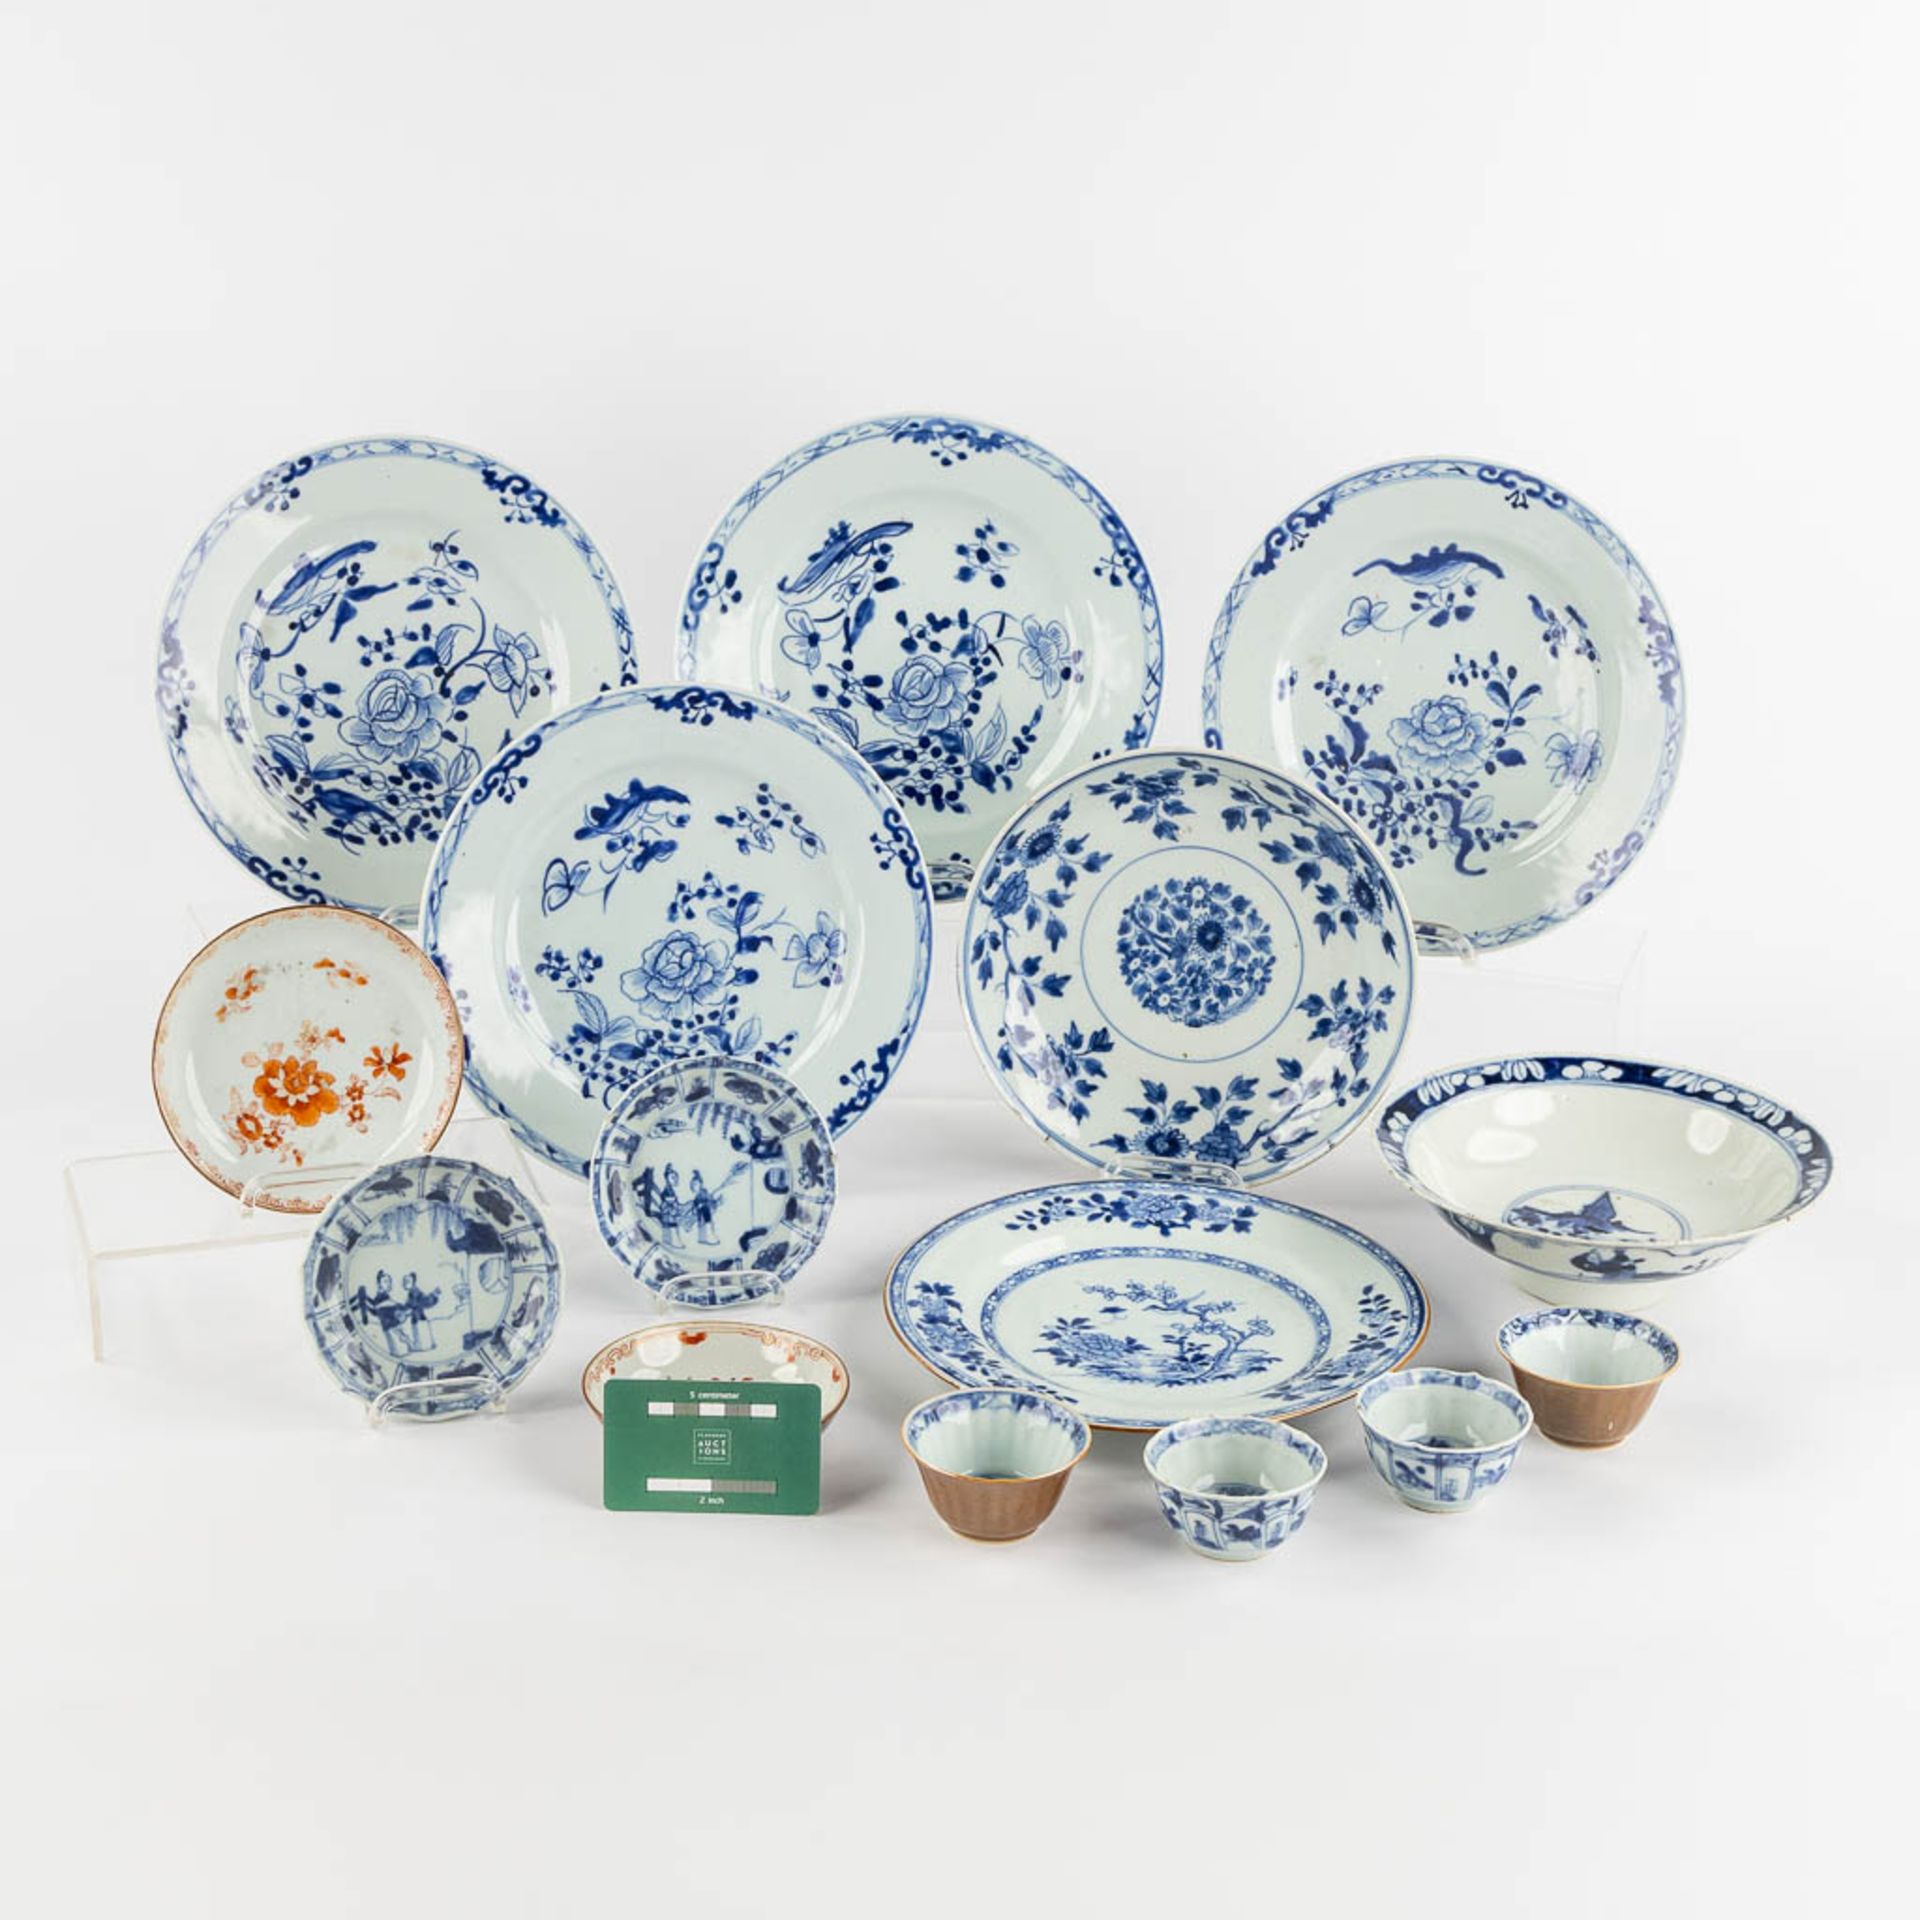 Fifteen Chinese cups, saucers and plates, blue white and Famille Roze. (D:23,4 cm) - Bild 2 aus 15